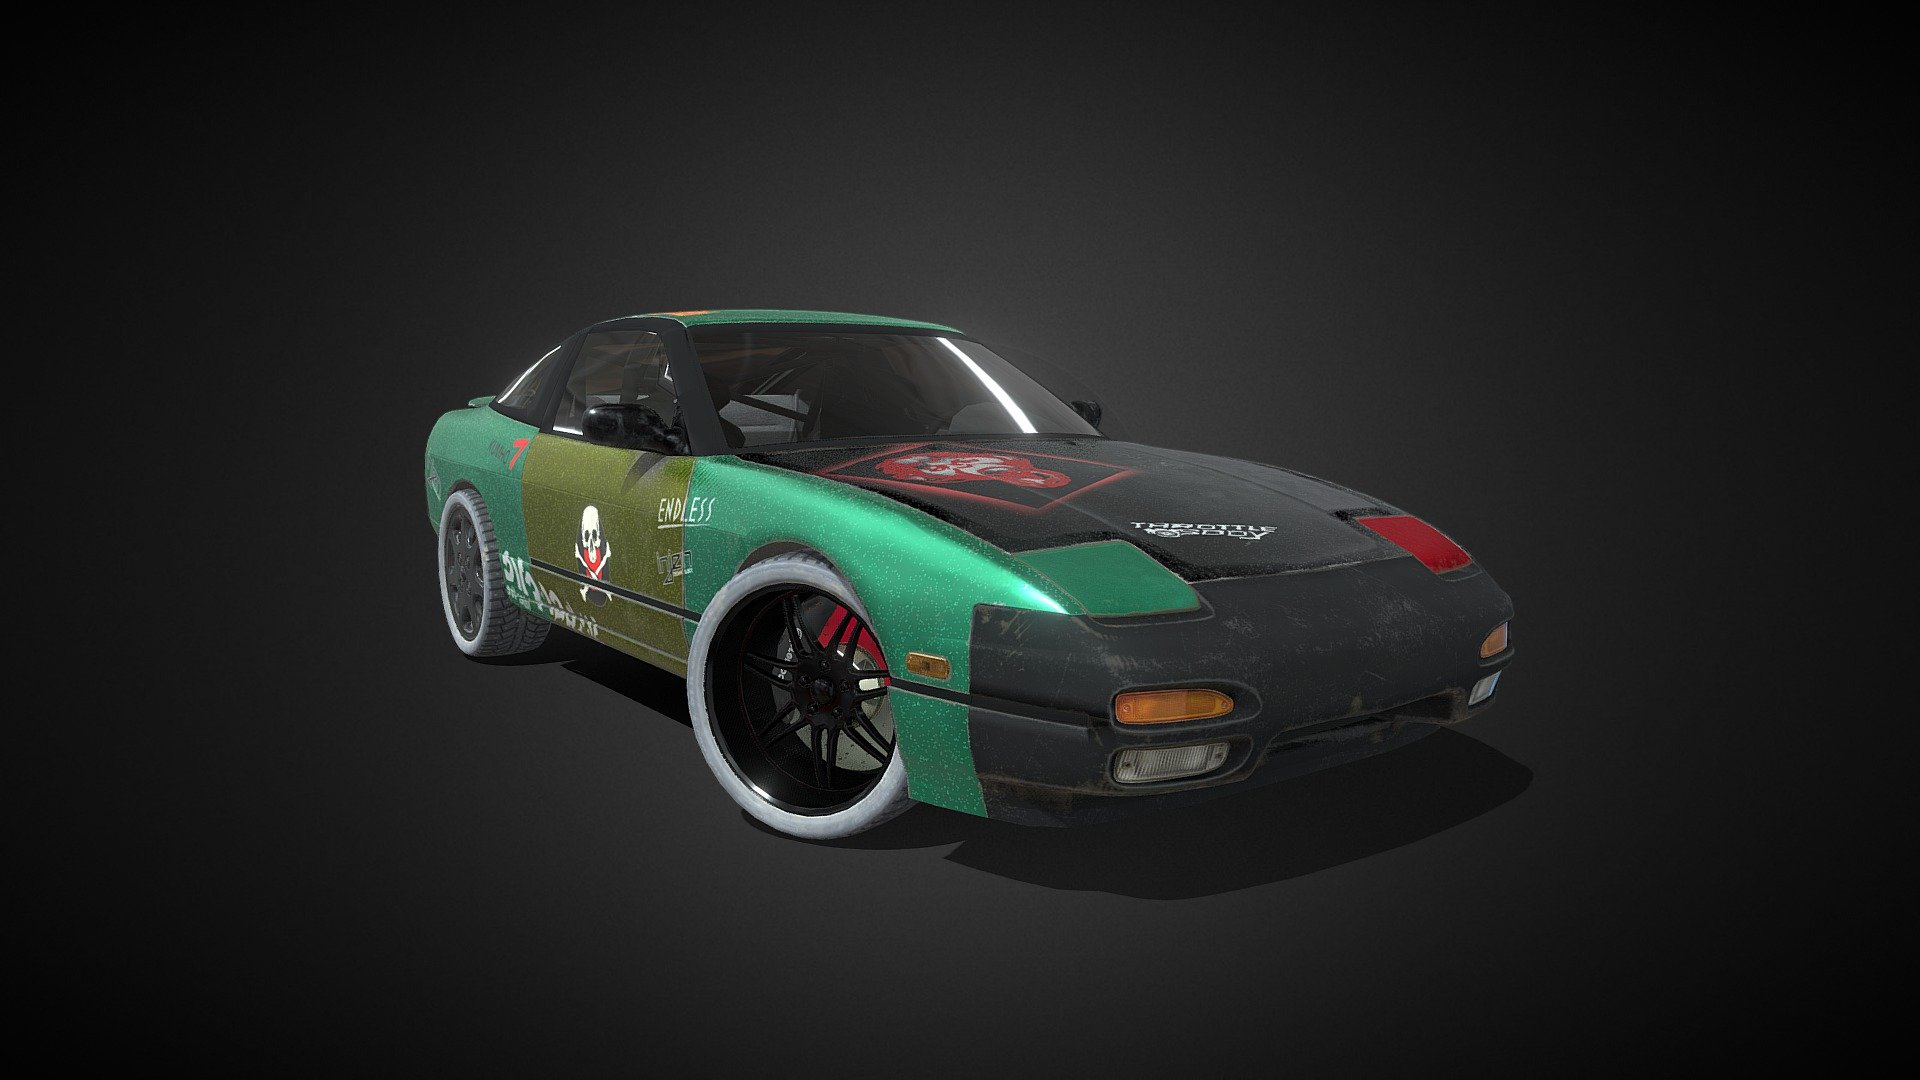 Another Nfs iconic car. I hope you enjoy it - 240 sx NFS Pro Street - Download Free 3D model by memoov (@movartD) 3d model